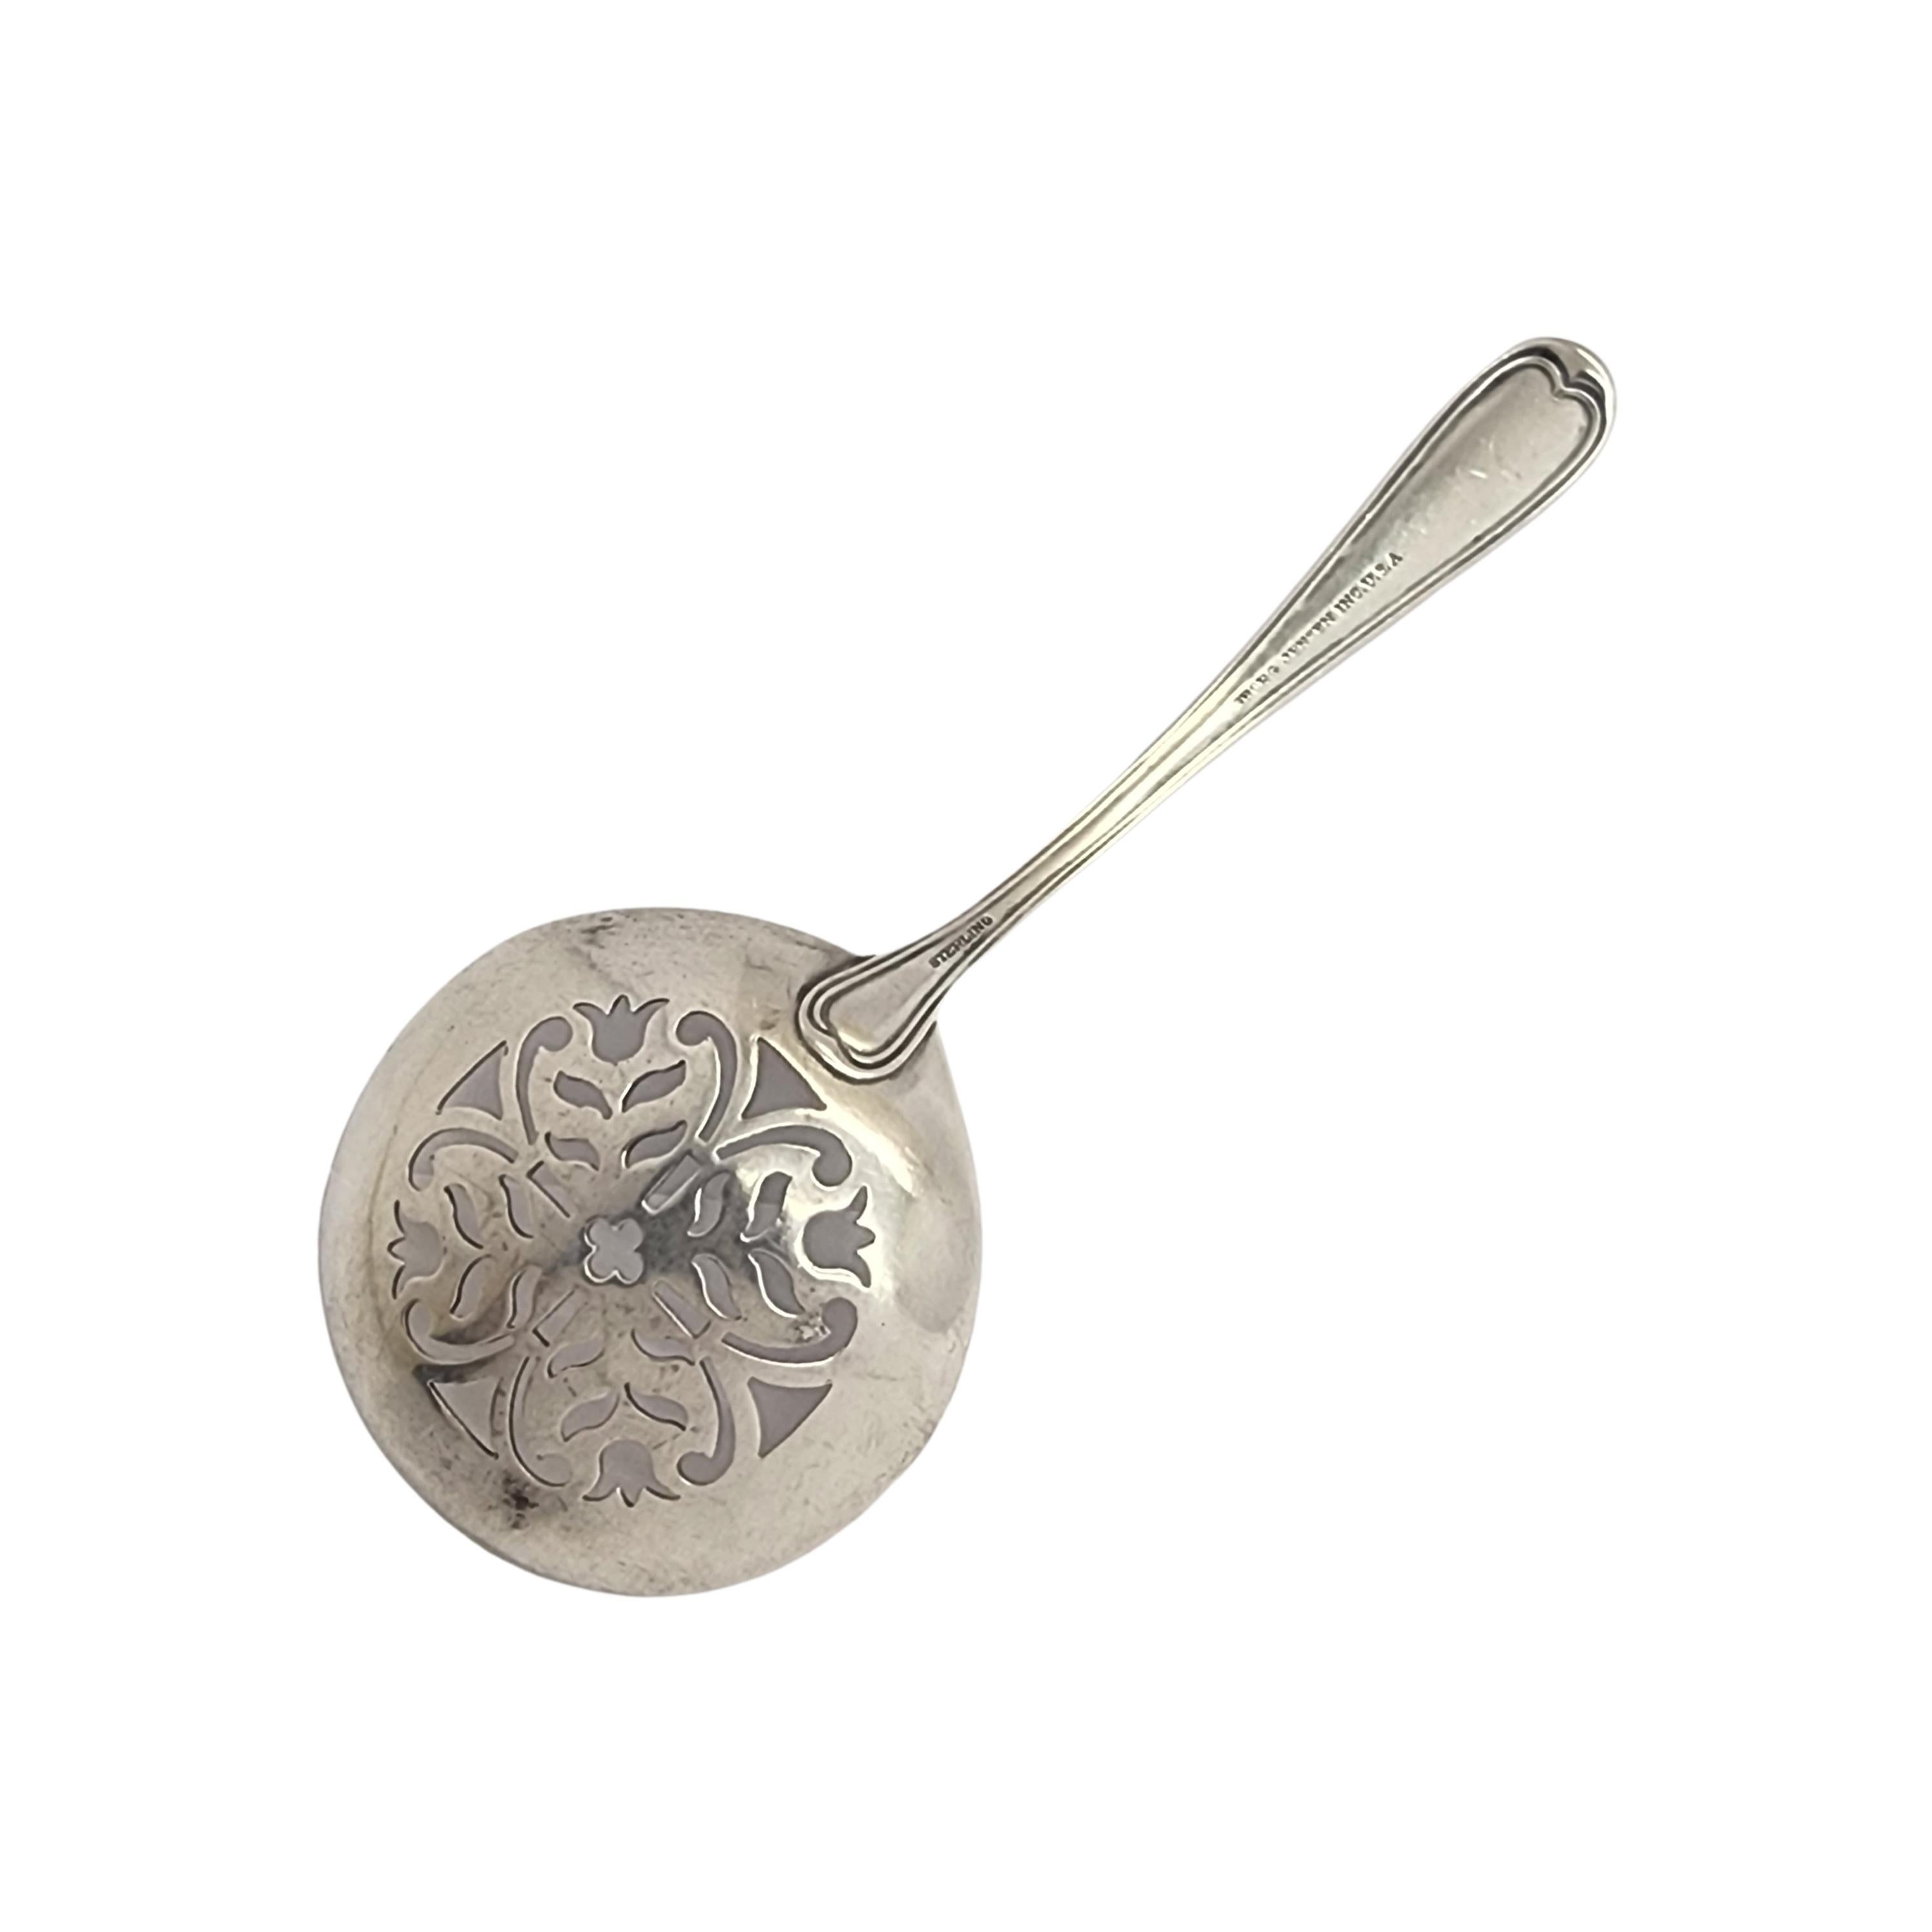 Sterling silver sugar sifter by Georg Jensen Inc USA.

No monogram

Small floral design on handle, ornate cut-out design on bowl.

Measures approx 4 3/4